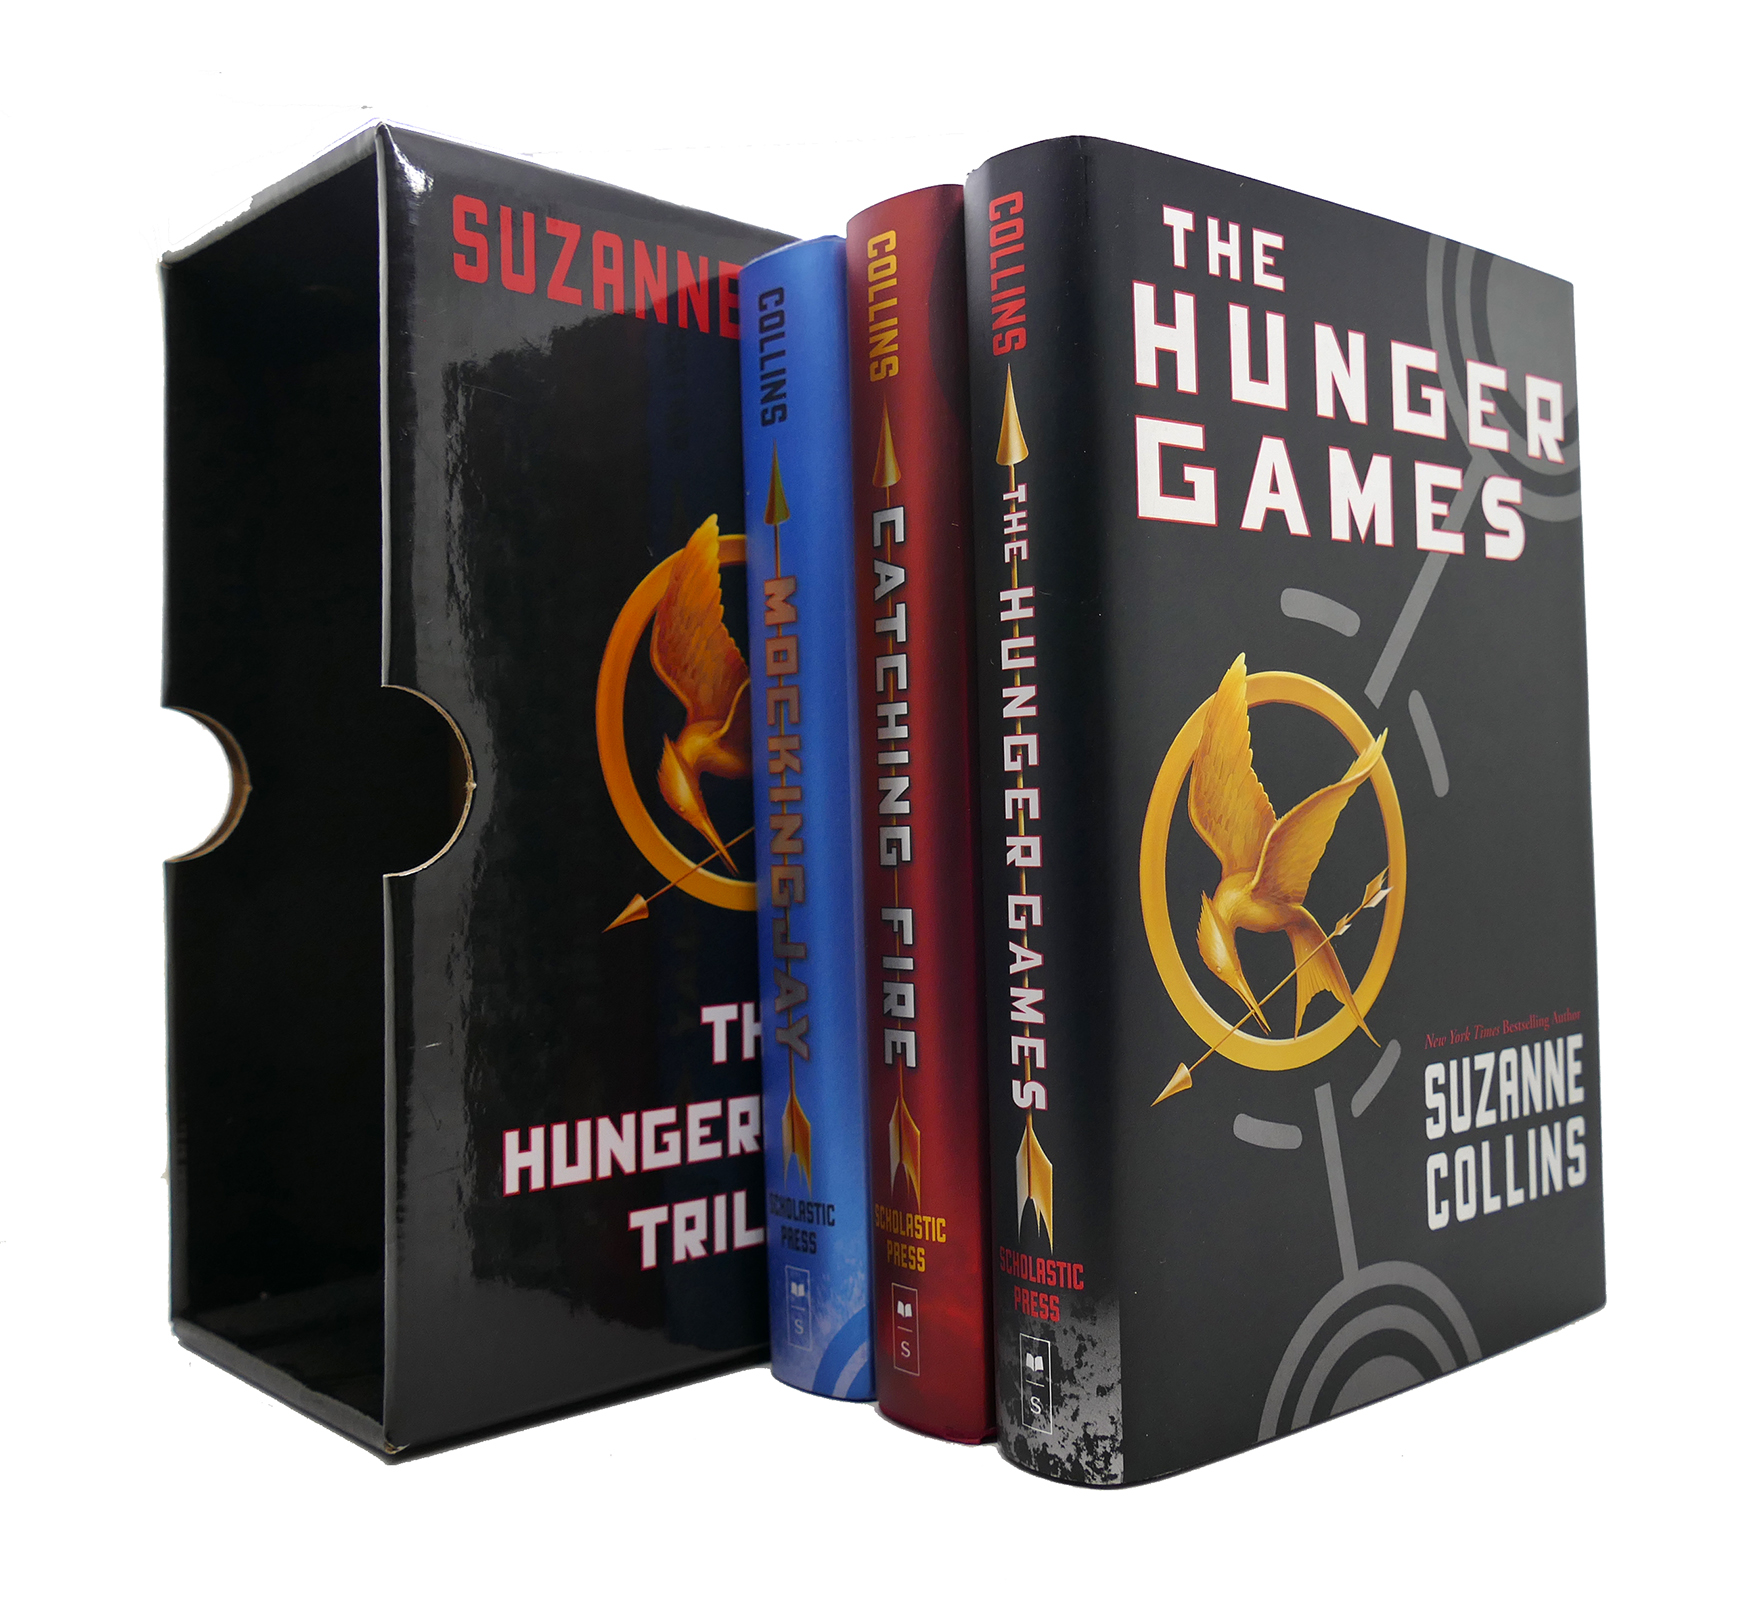 The Hunger Games. By Suzanne Collins. First Edition, First Printing.  Scholastic. New York, 2008.